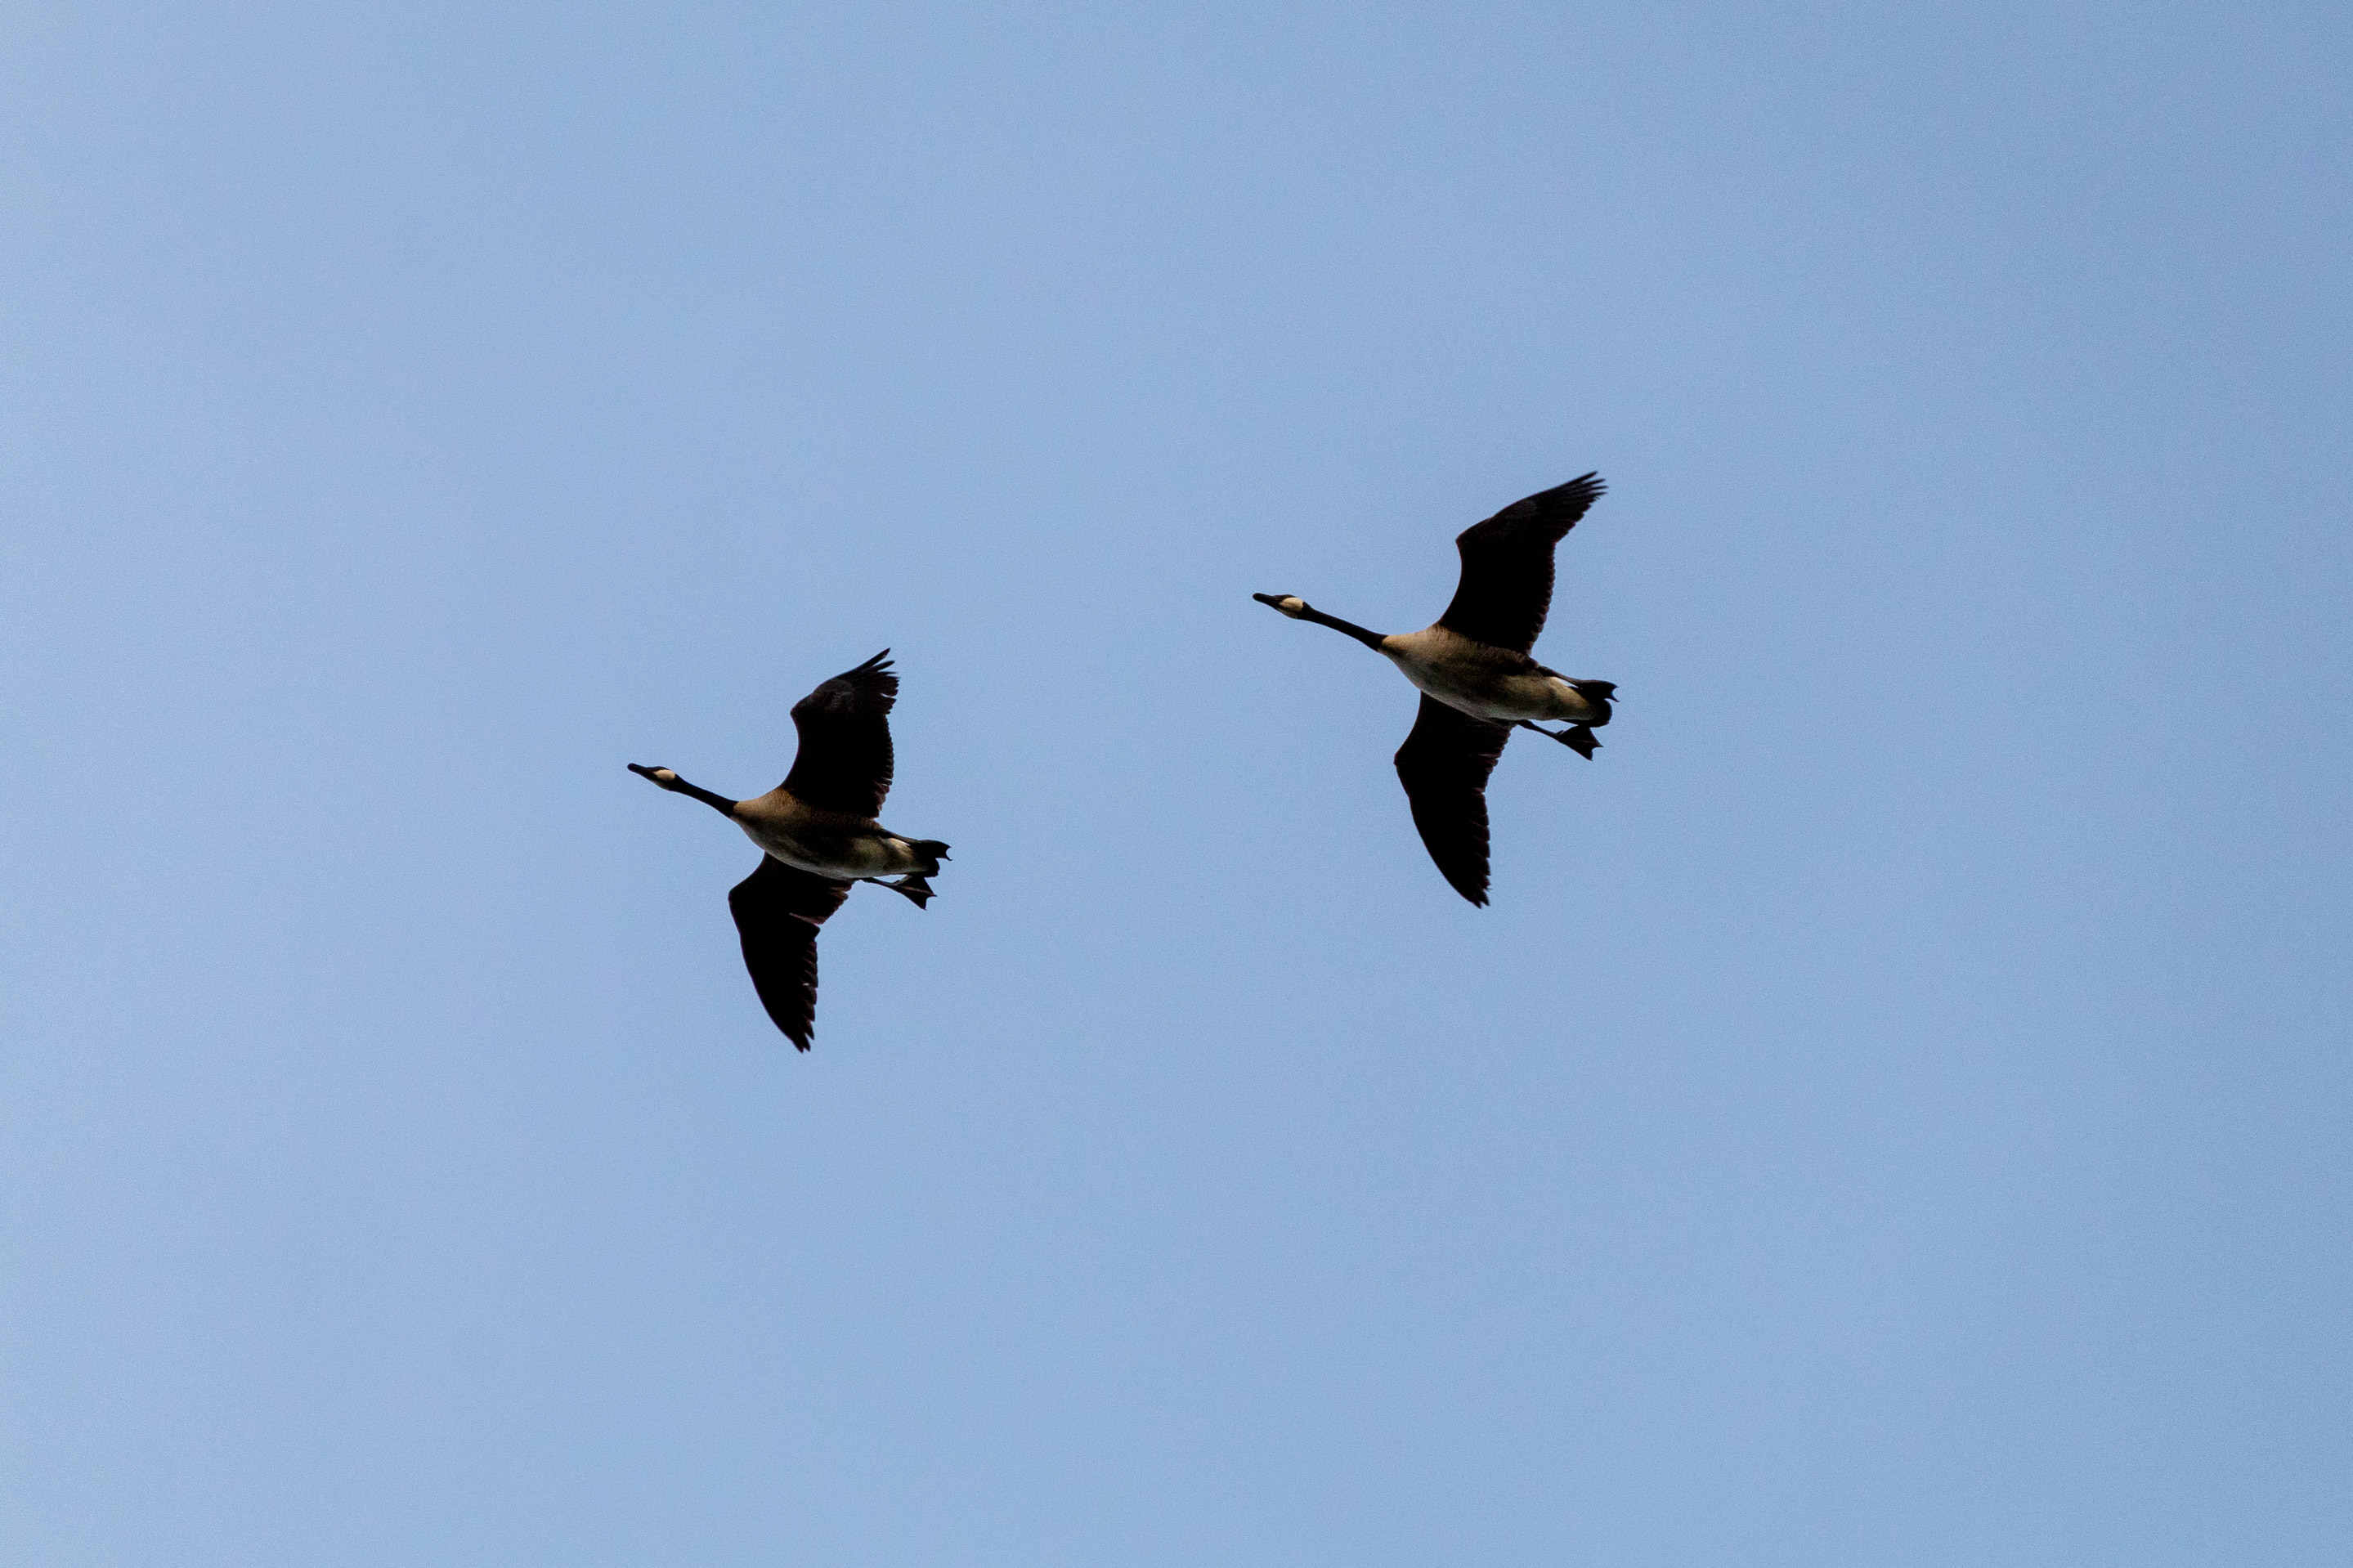 Two geese flying in the blue sky